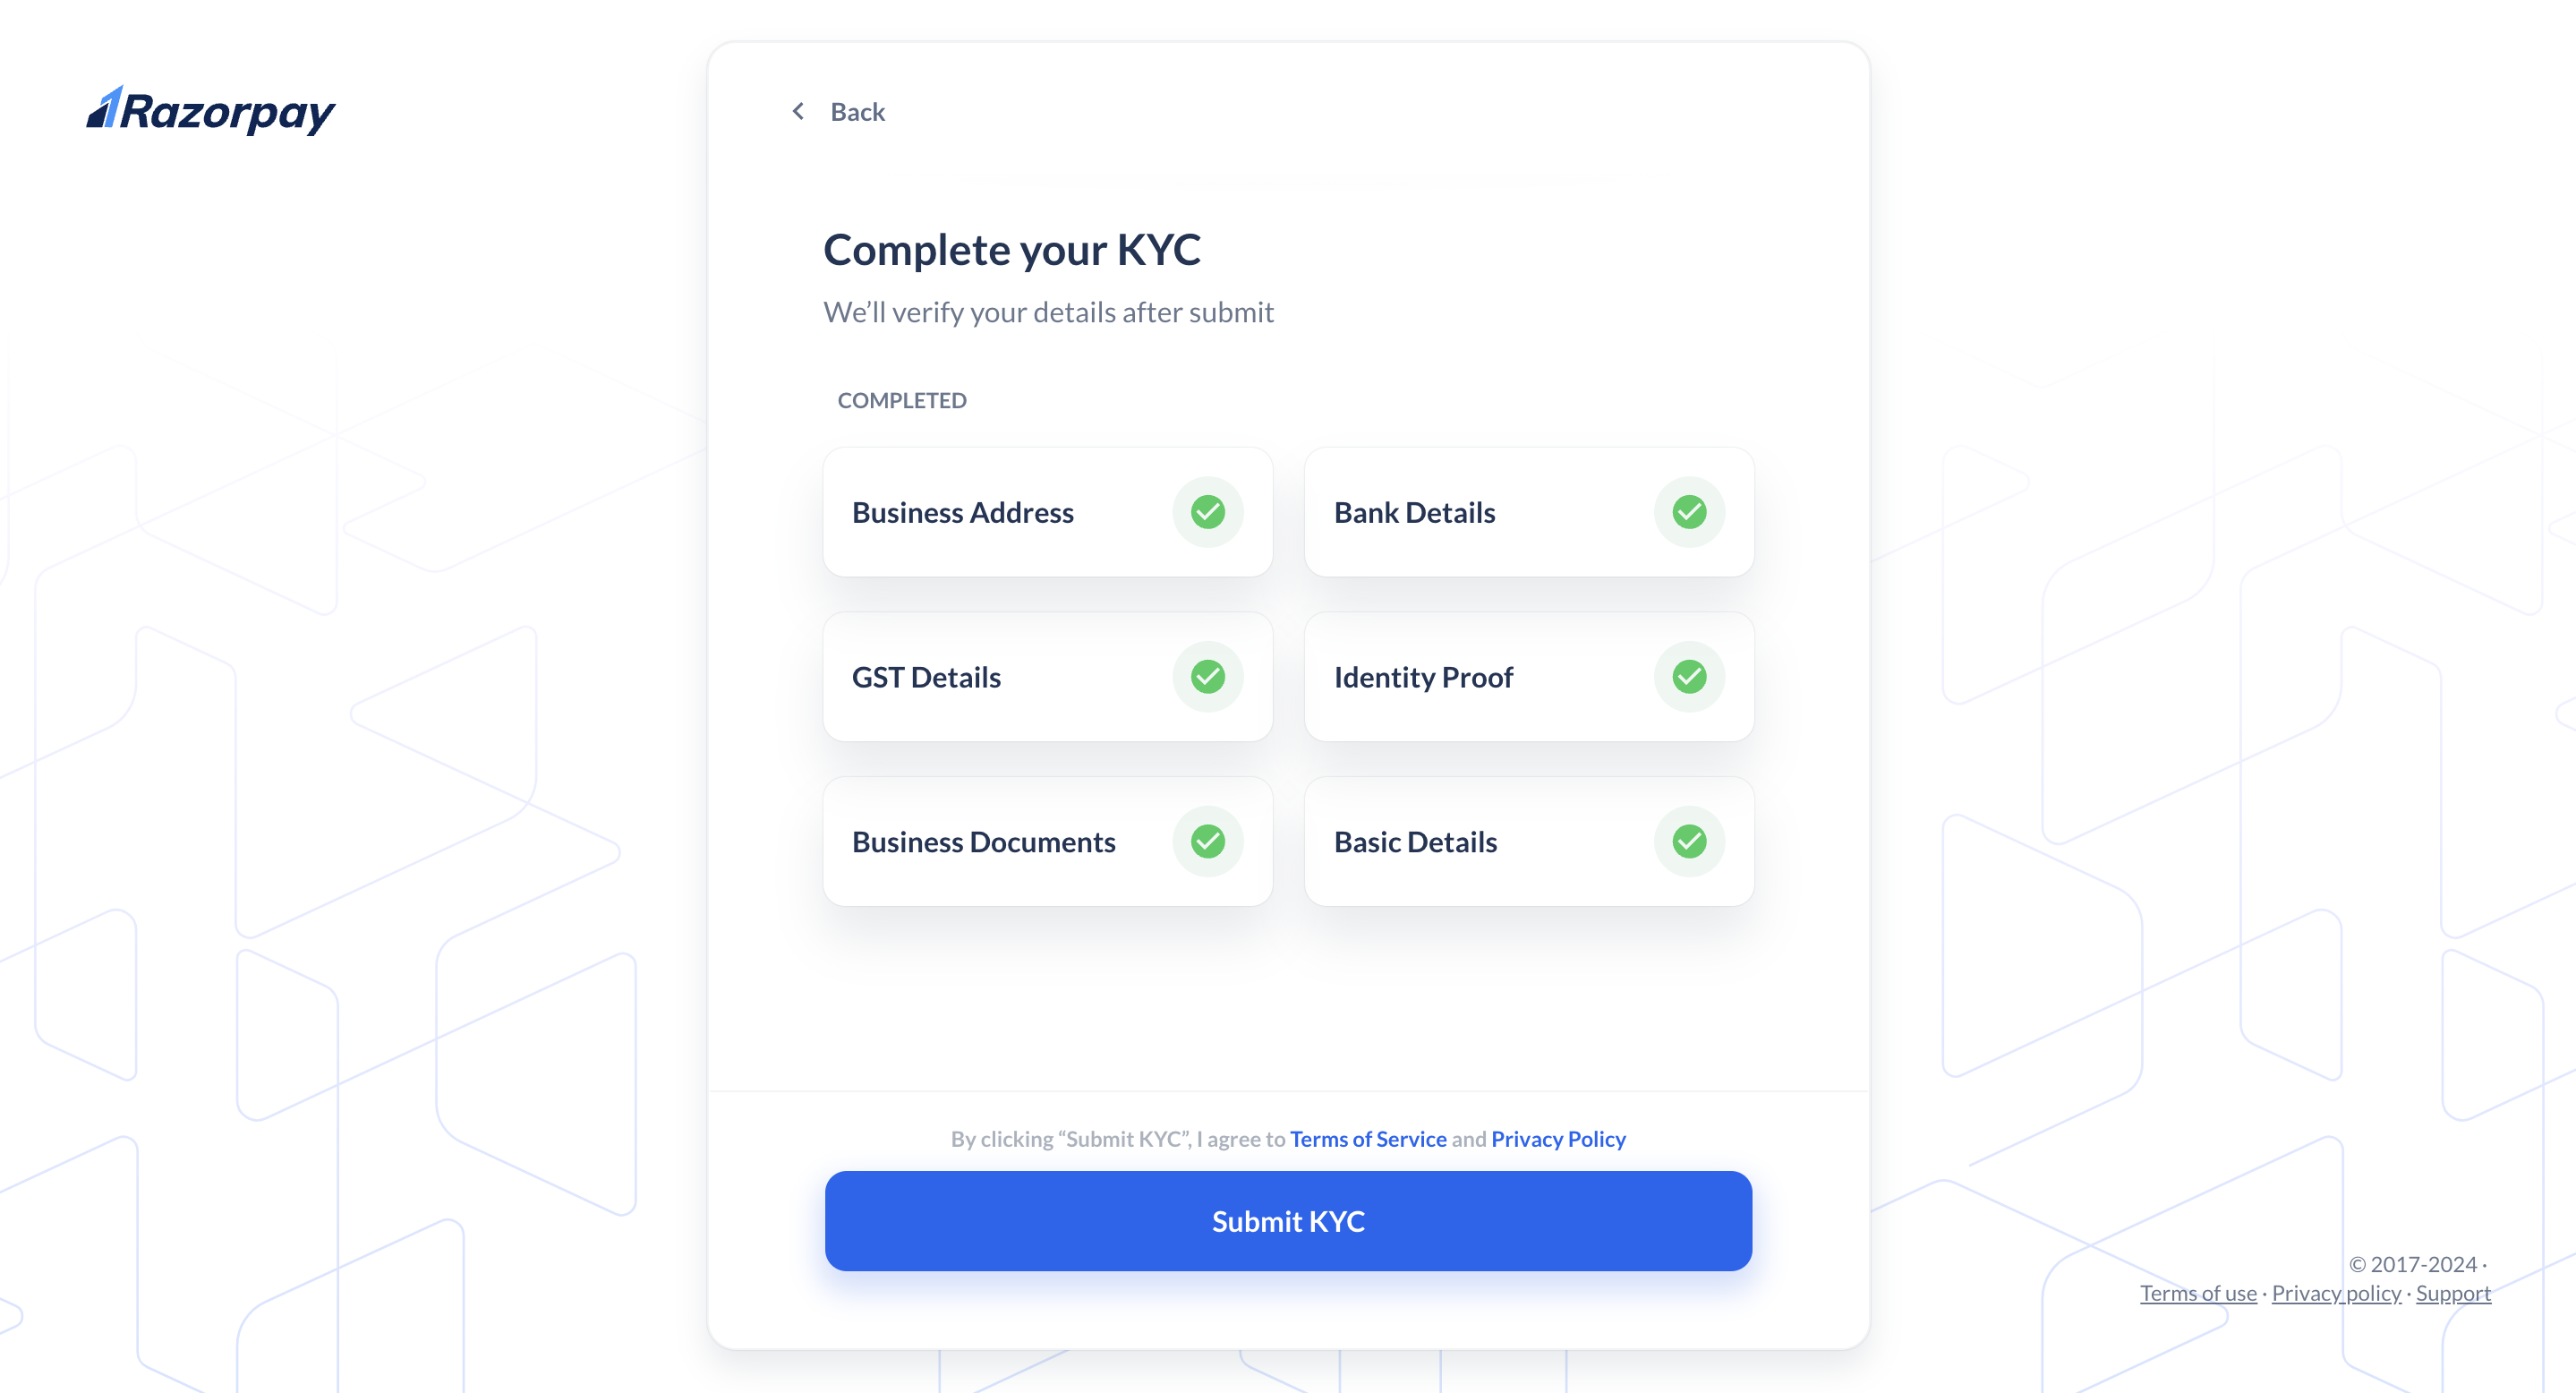 Business Details - Submit KYC Details